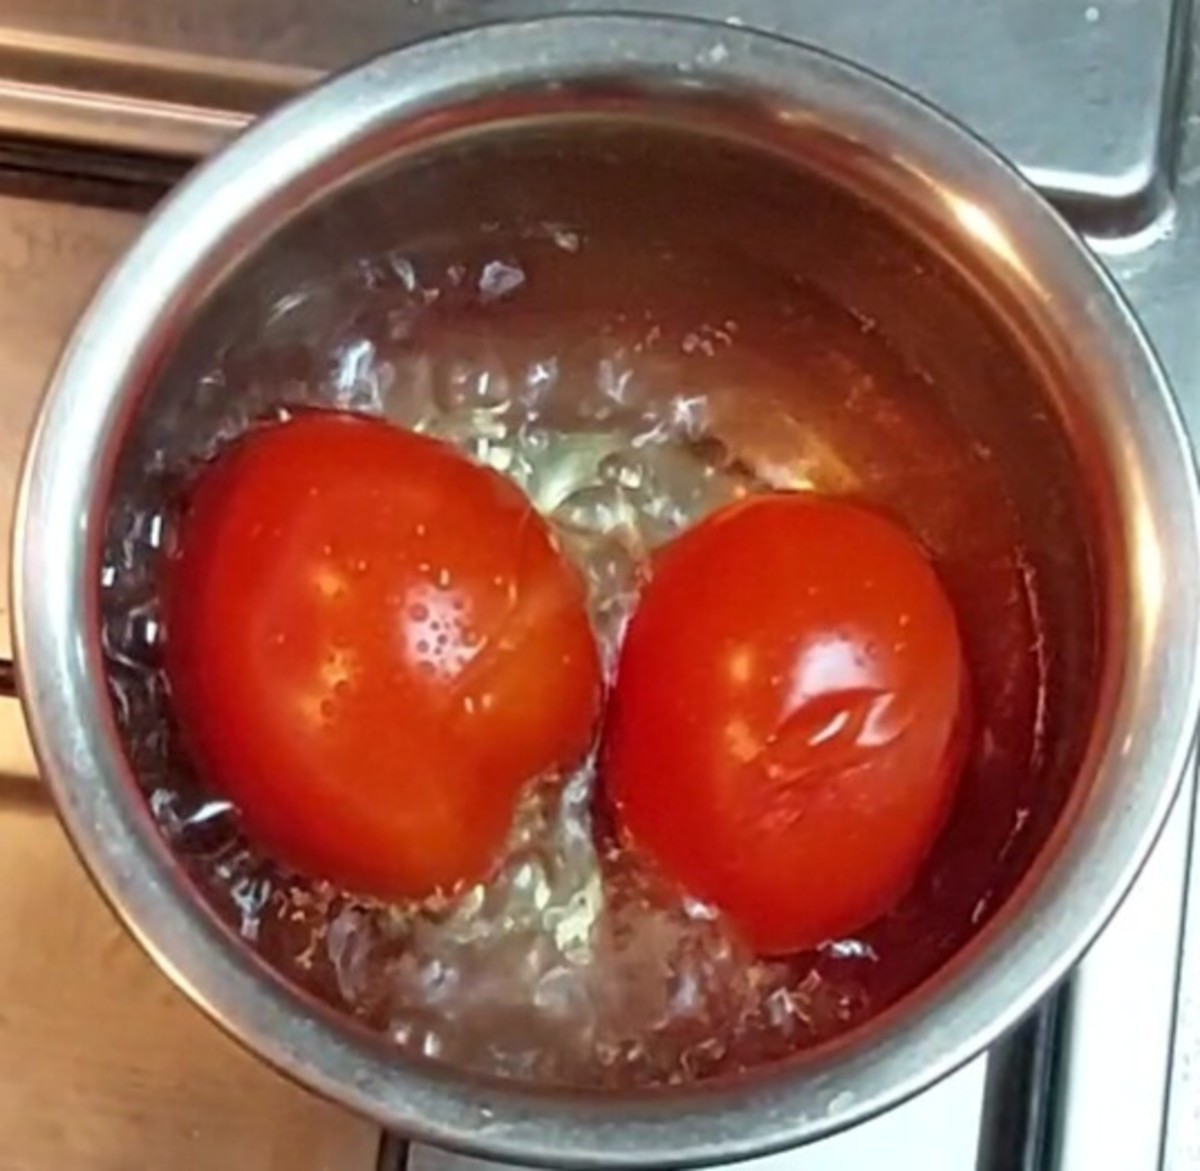 In a vessel, add 2-3 ripe tomatoes and 1 cup of water. Close the lid and cook till the skins start to split; then switch off the flame.